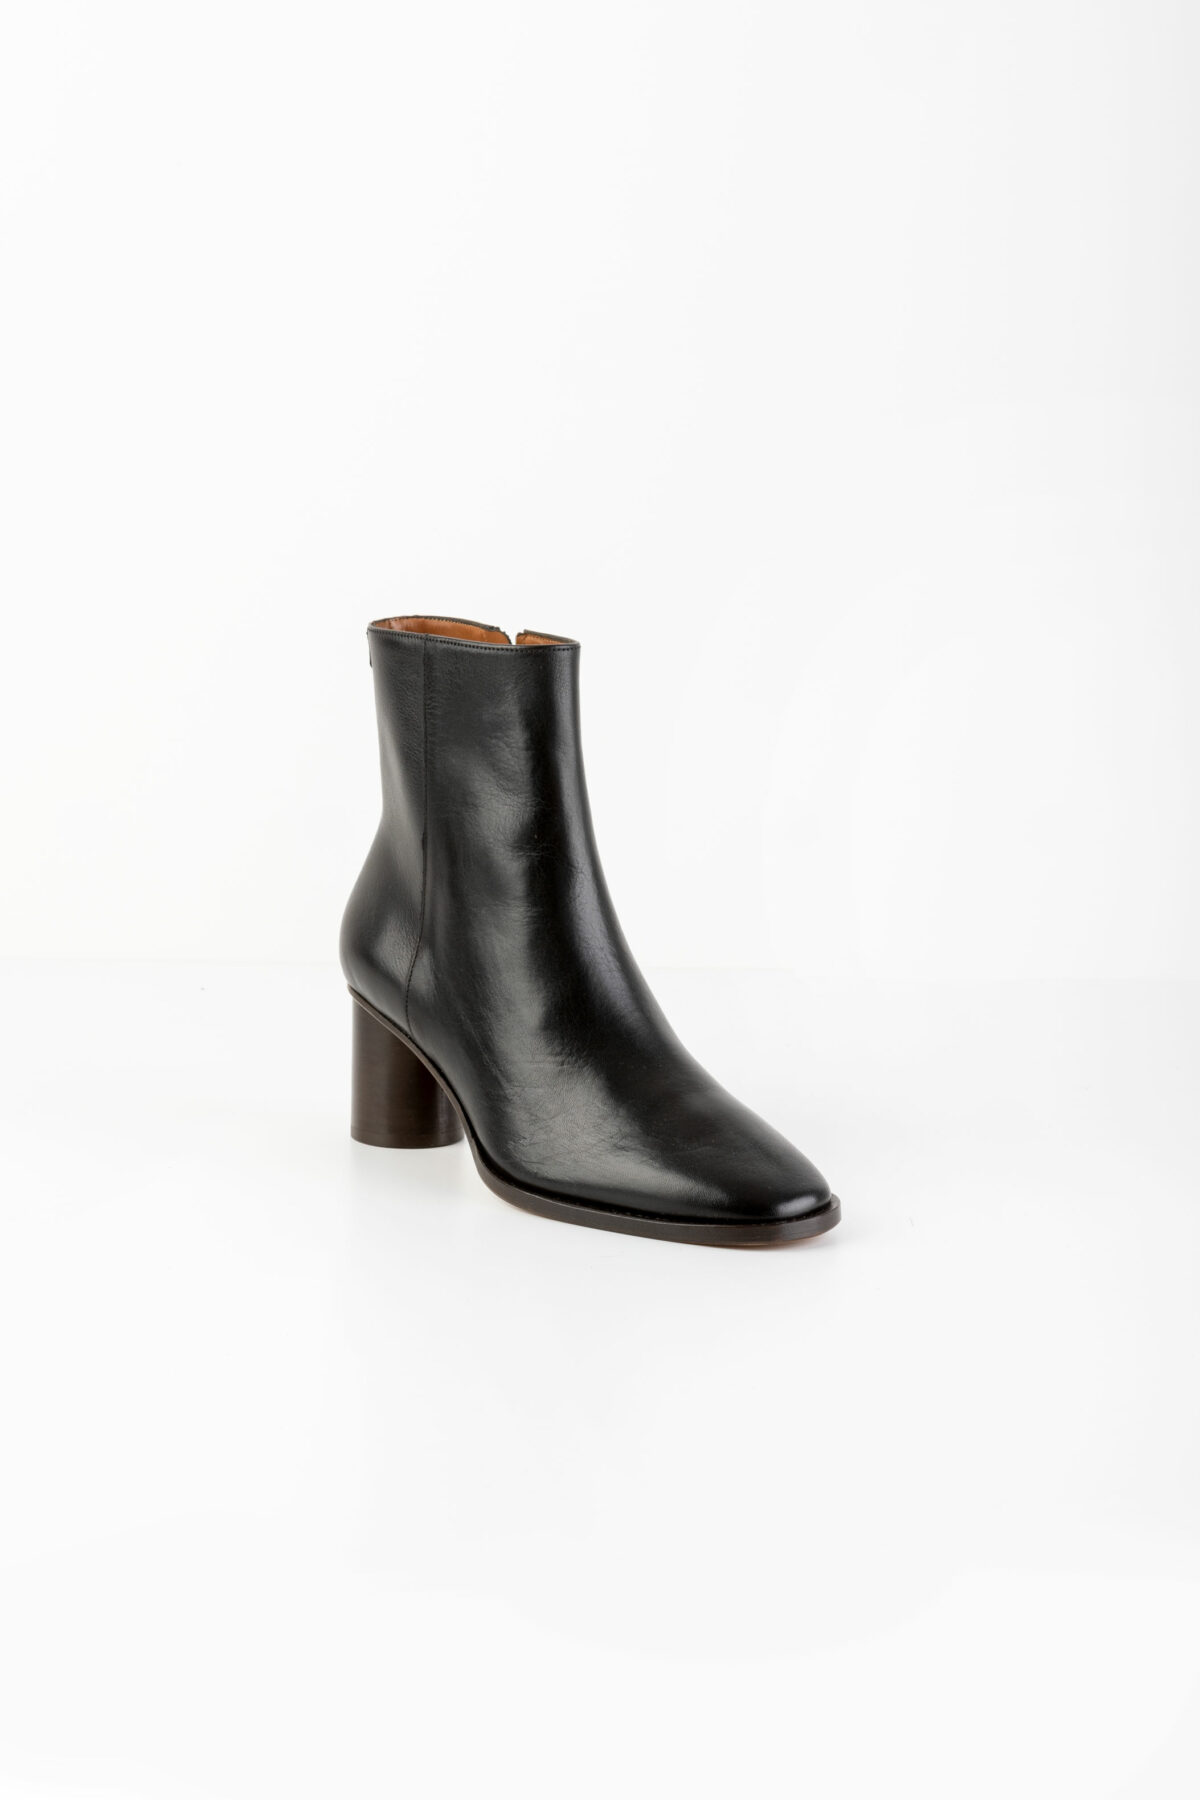 daccan-leather-black-boots-pointed-anthology-paris-handmade-matchboxathens